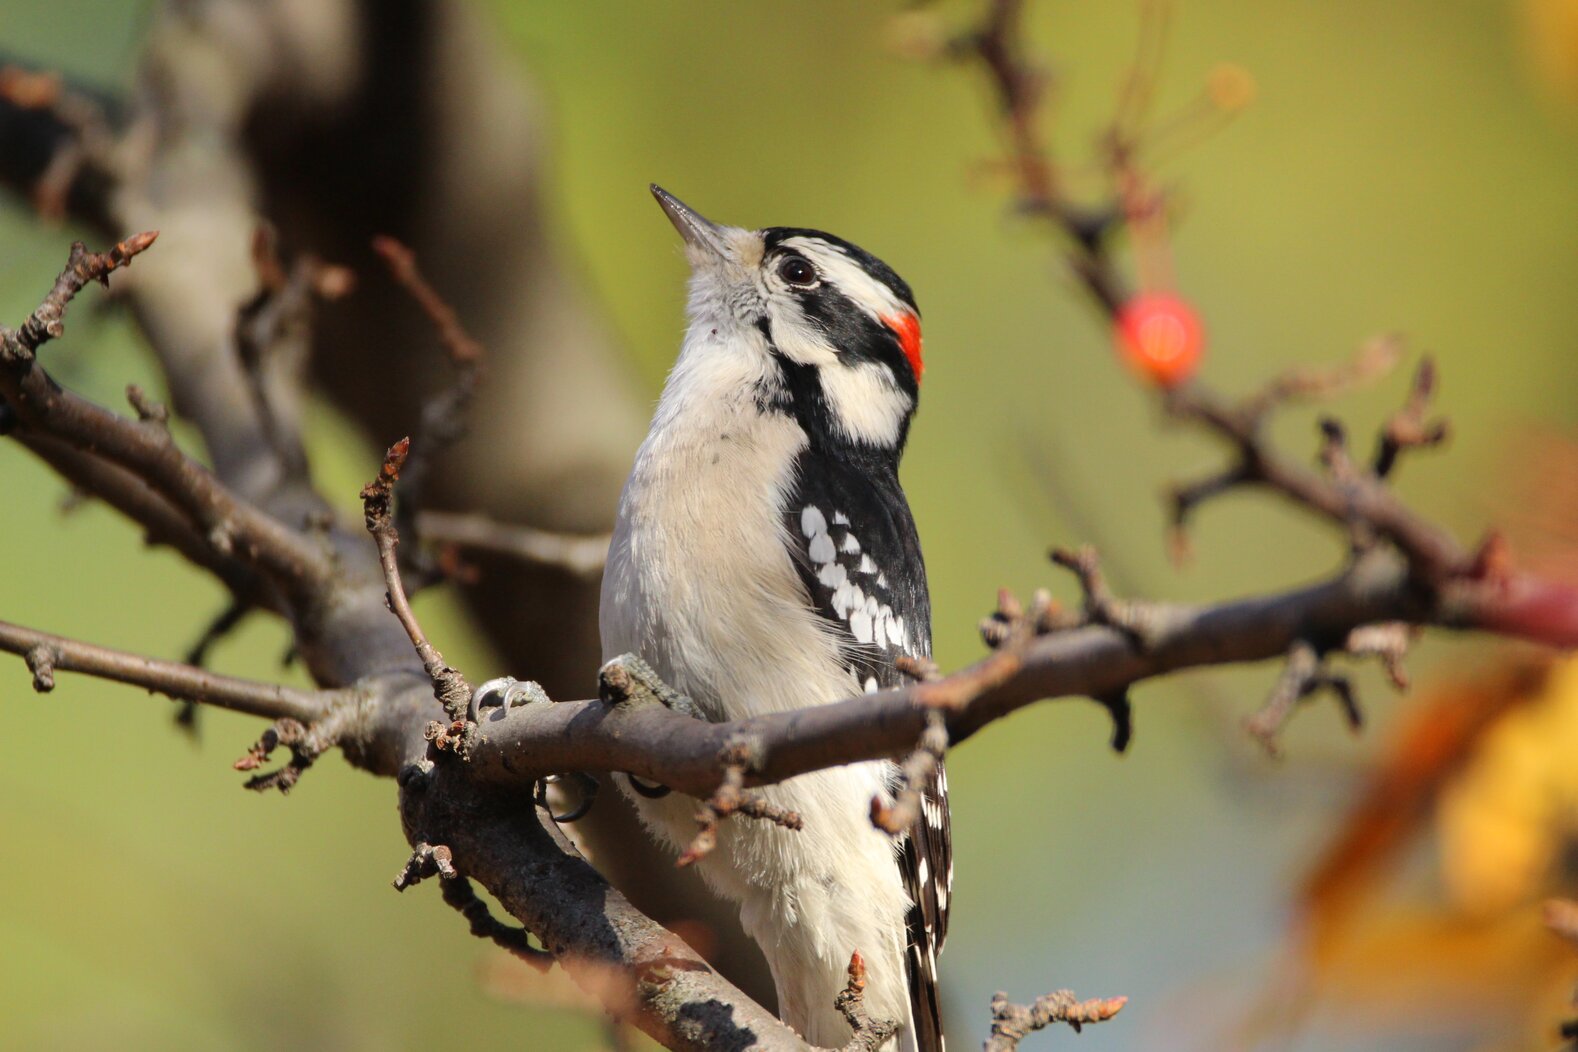 The whinnying call of the Downy Woodpecker (here, a male with his red crown patch) is heard in the woods of Riverdale Park and Raoul Wallenberg Forest Preserve. Photo: Dave Ostapiuk